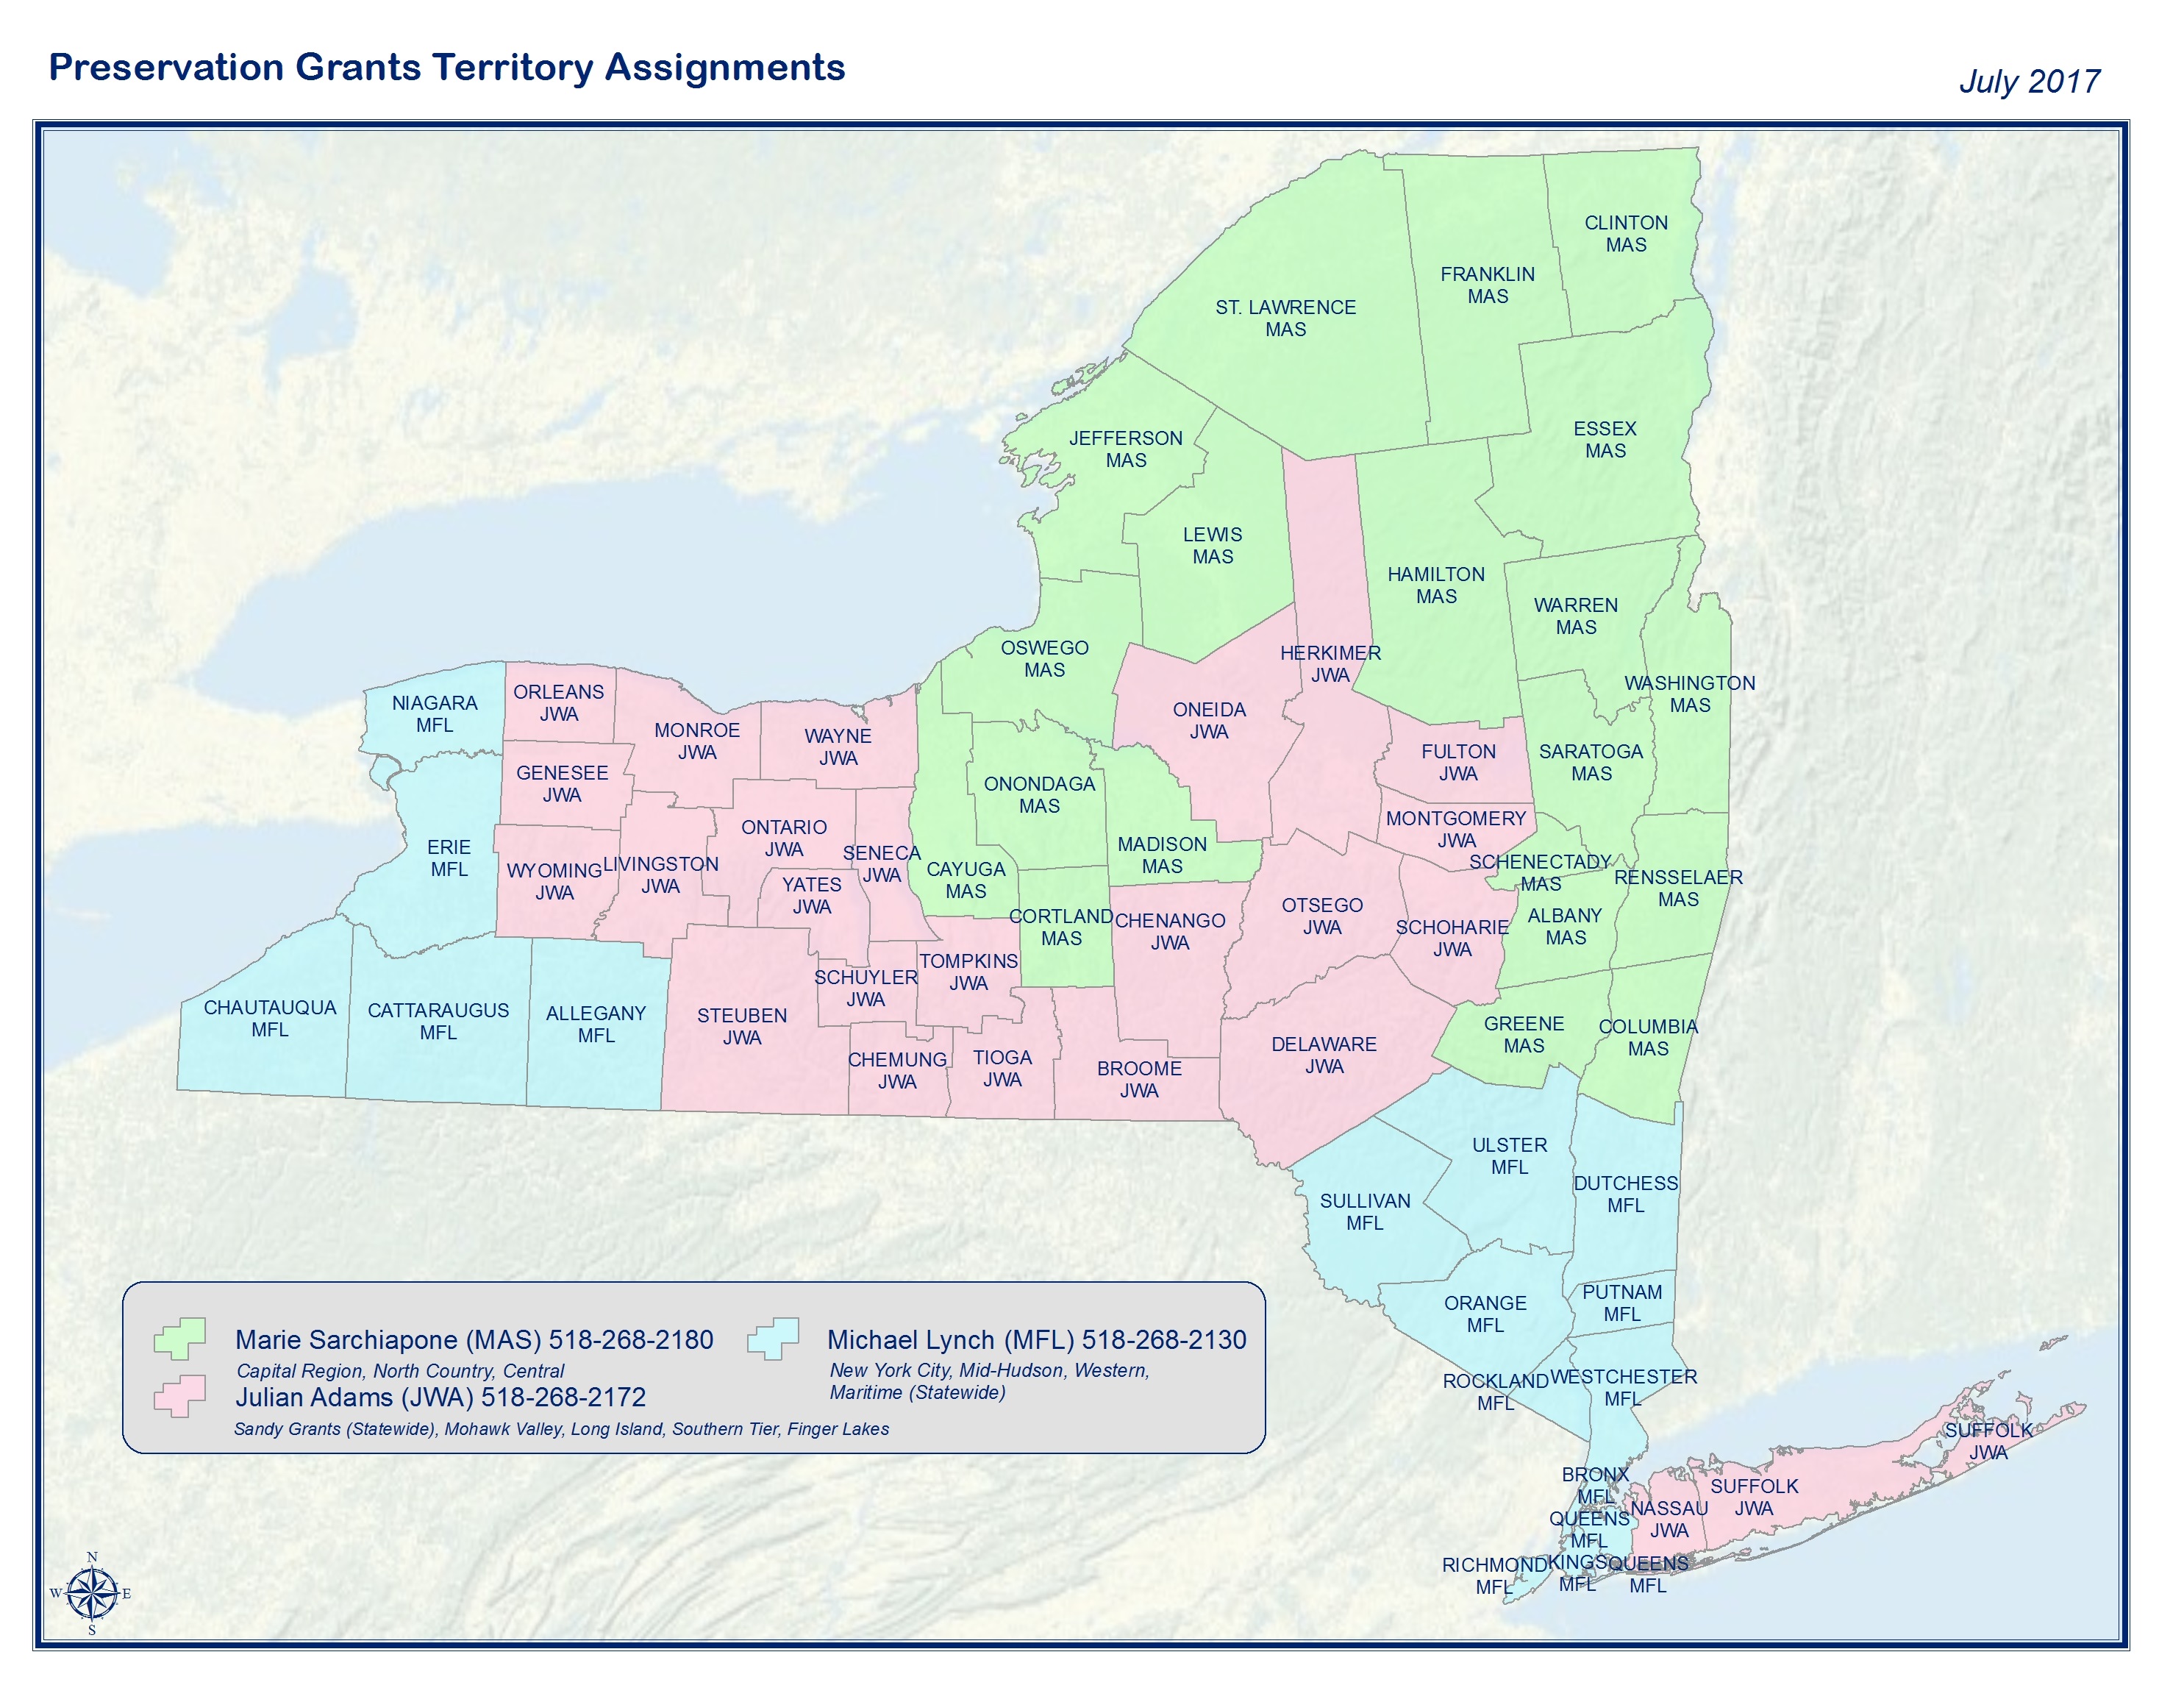 public outreach activities and assists the public with NYS and OPRHP grant opportunities To find the grant reviewer assigned to your county please